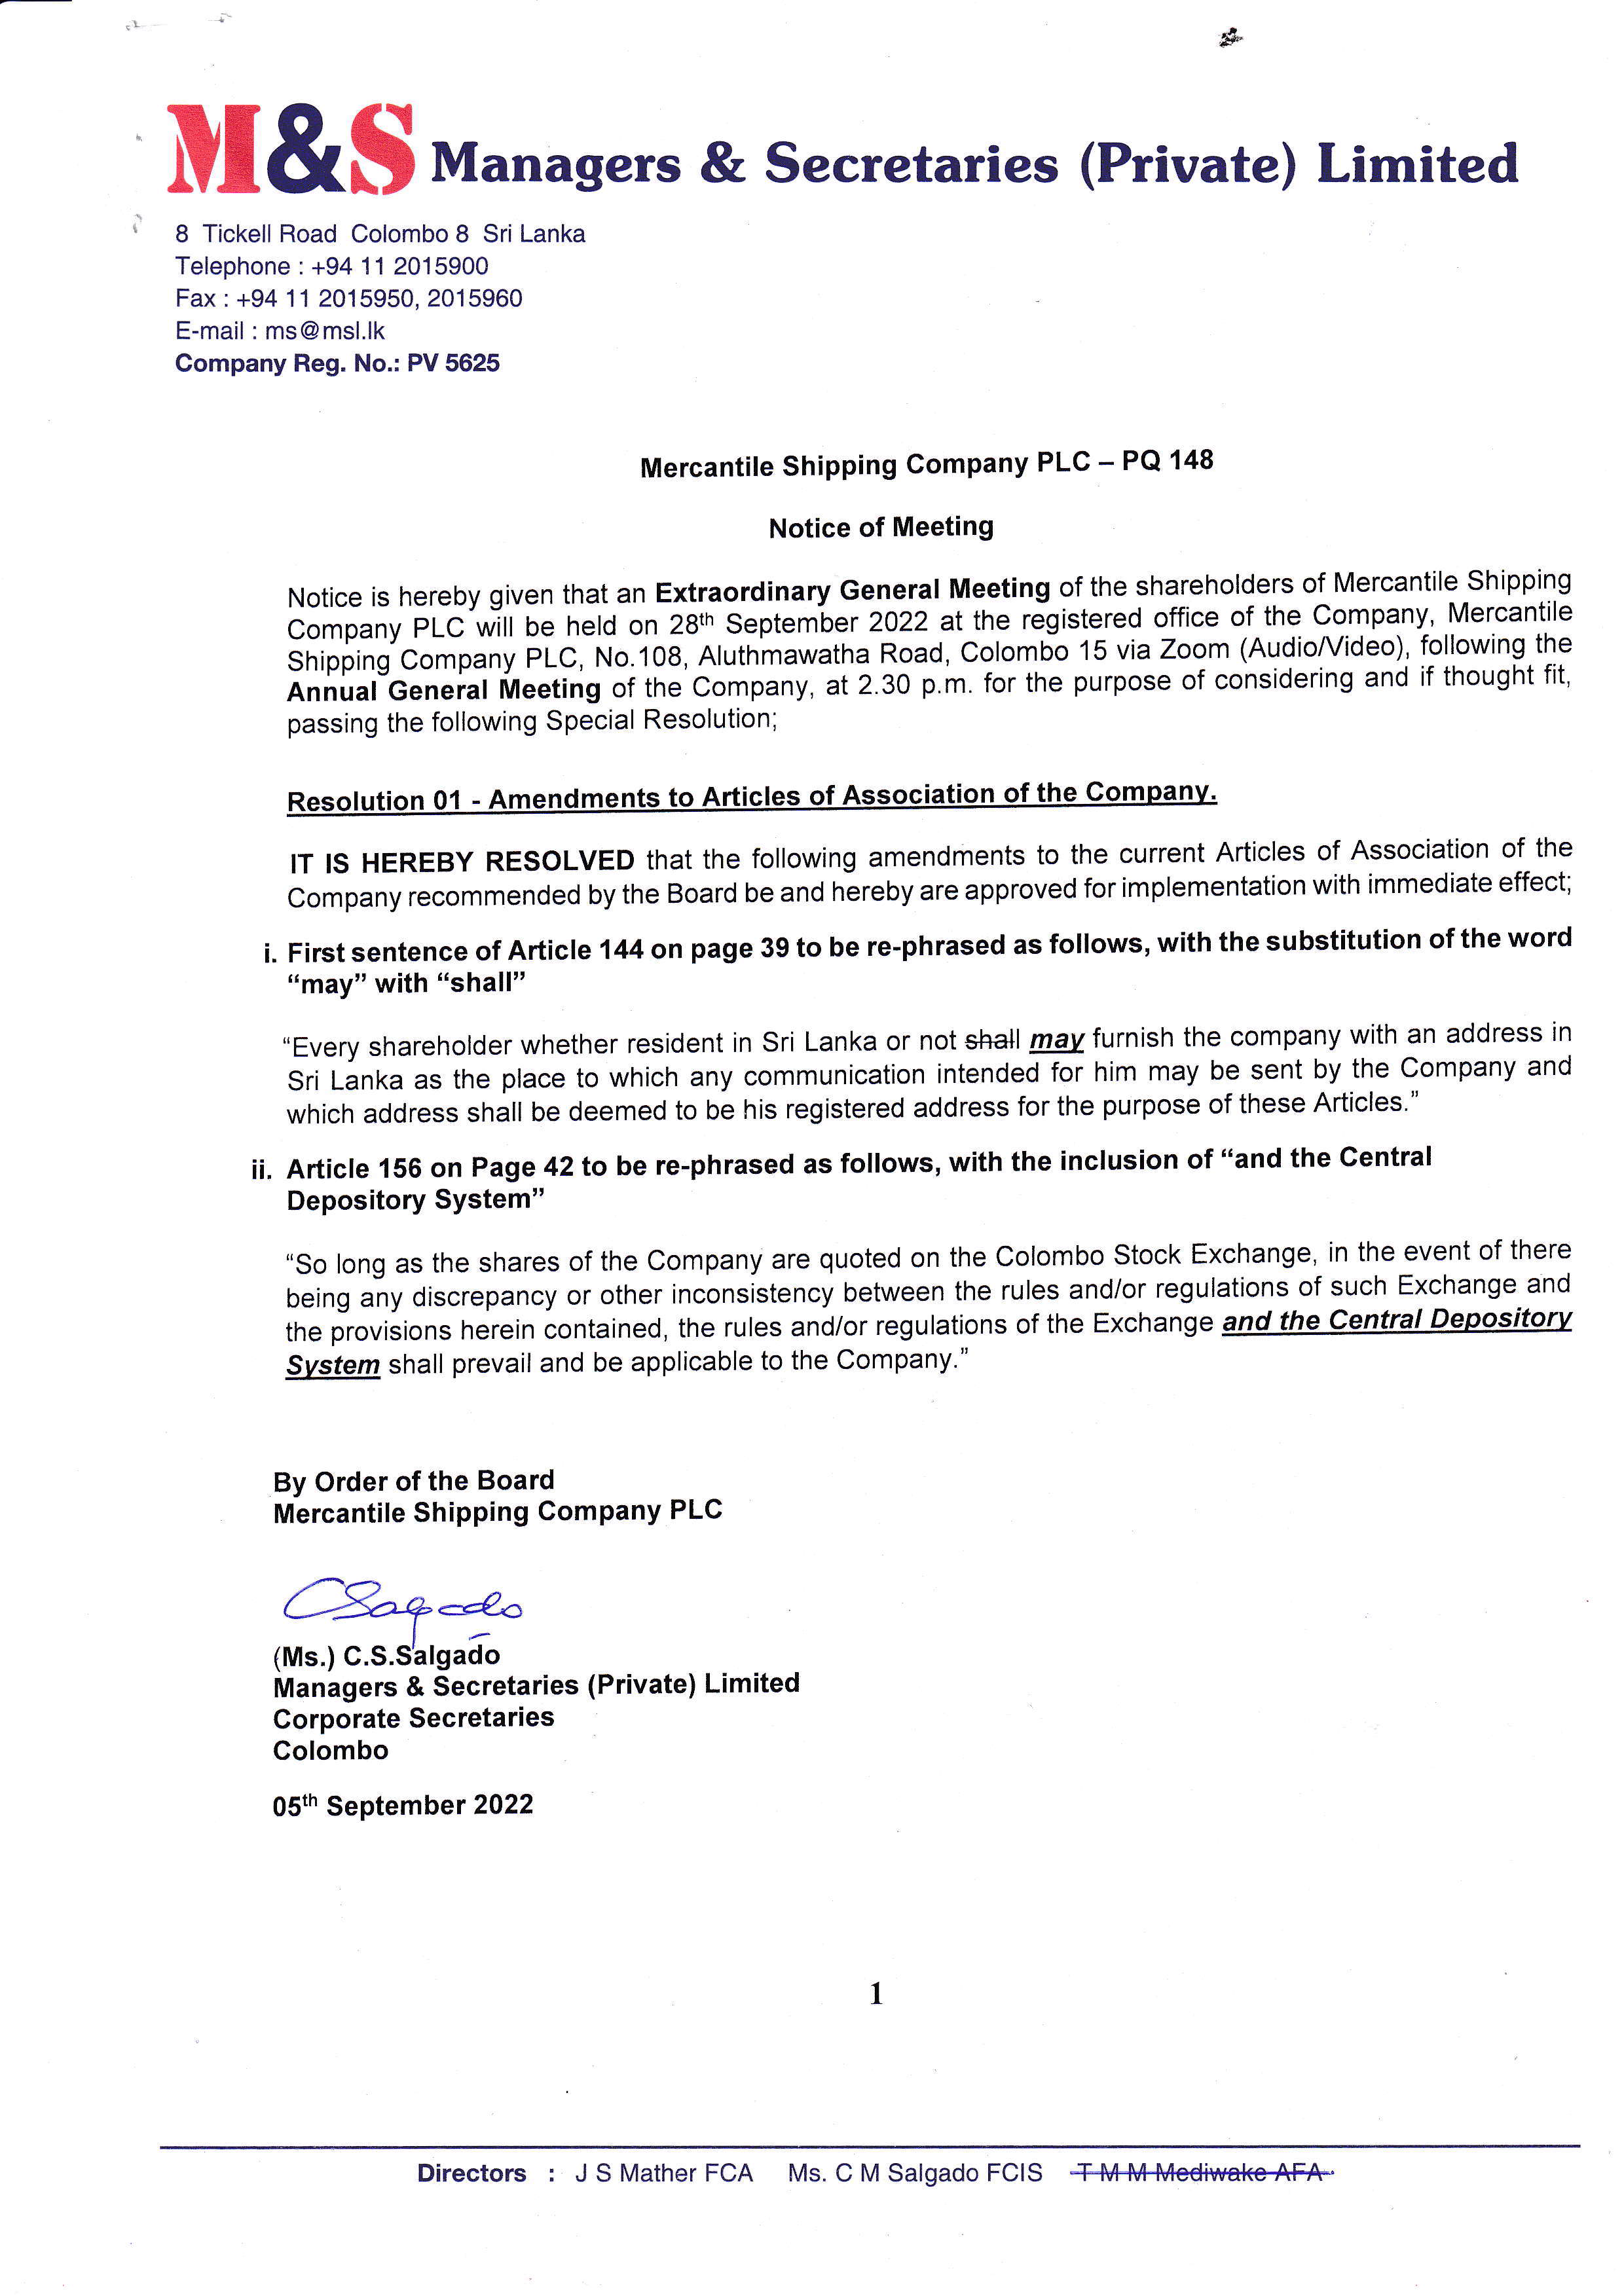 EGM Notice and other documents